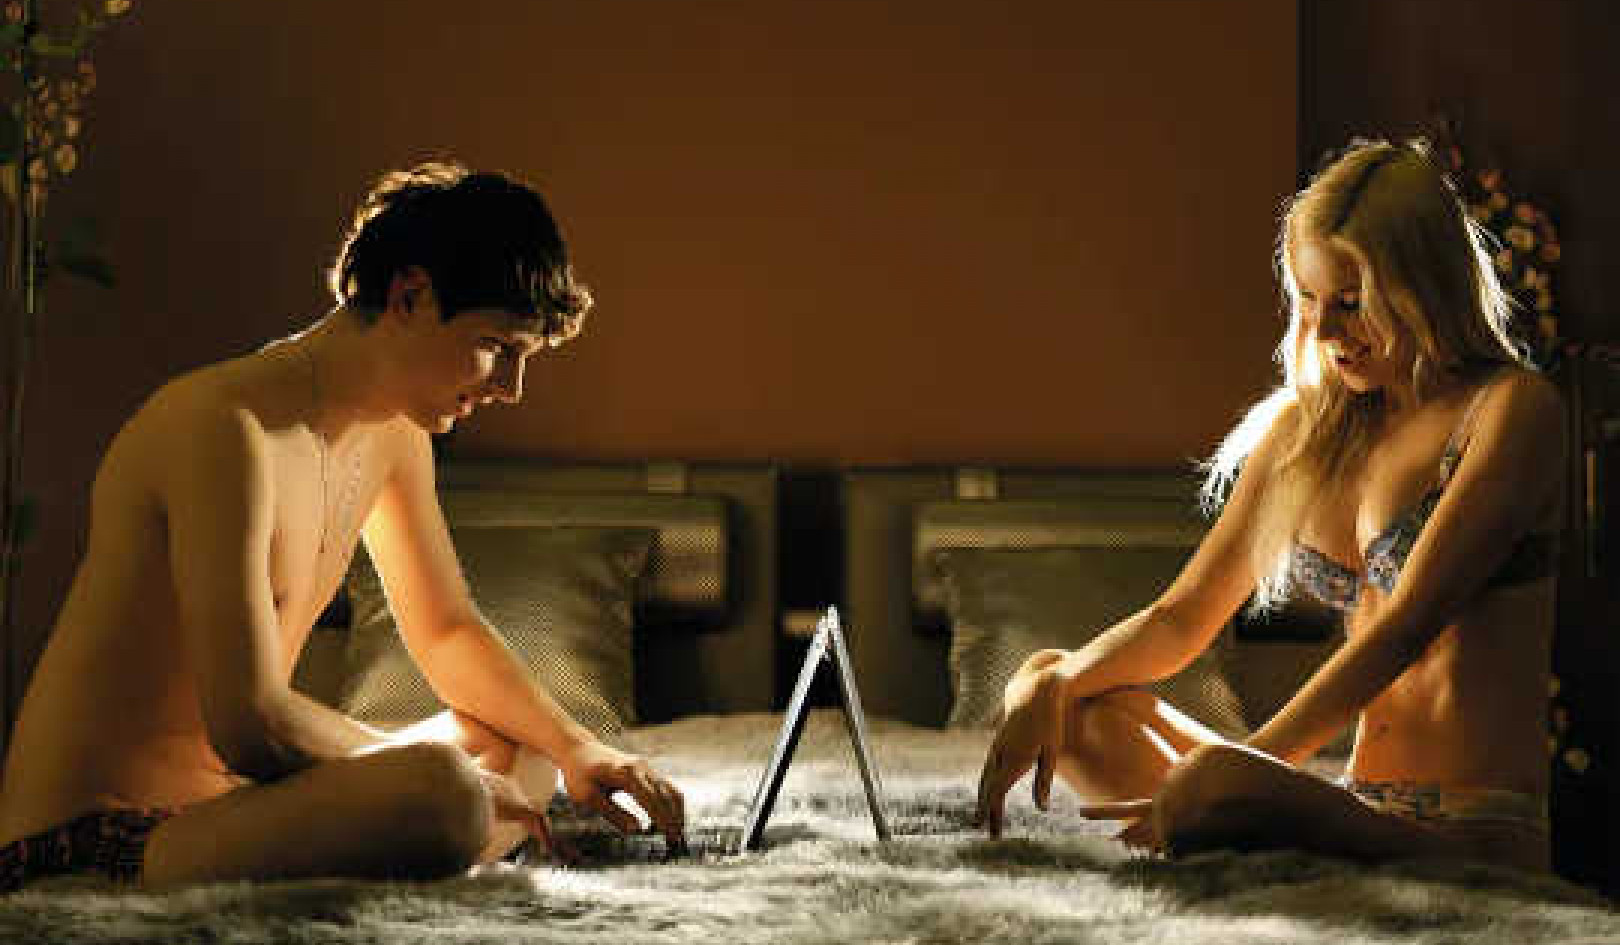 Cybersex, Erotic Tech And Virtual Intimacy Are On The Rise